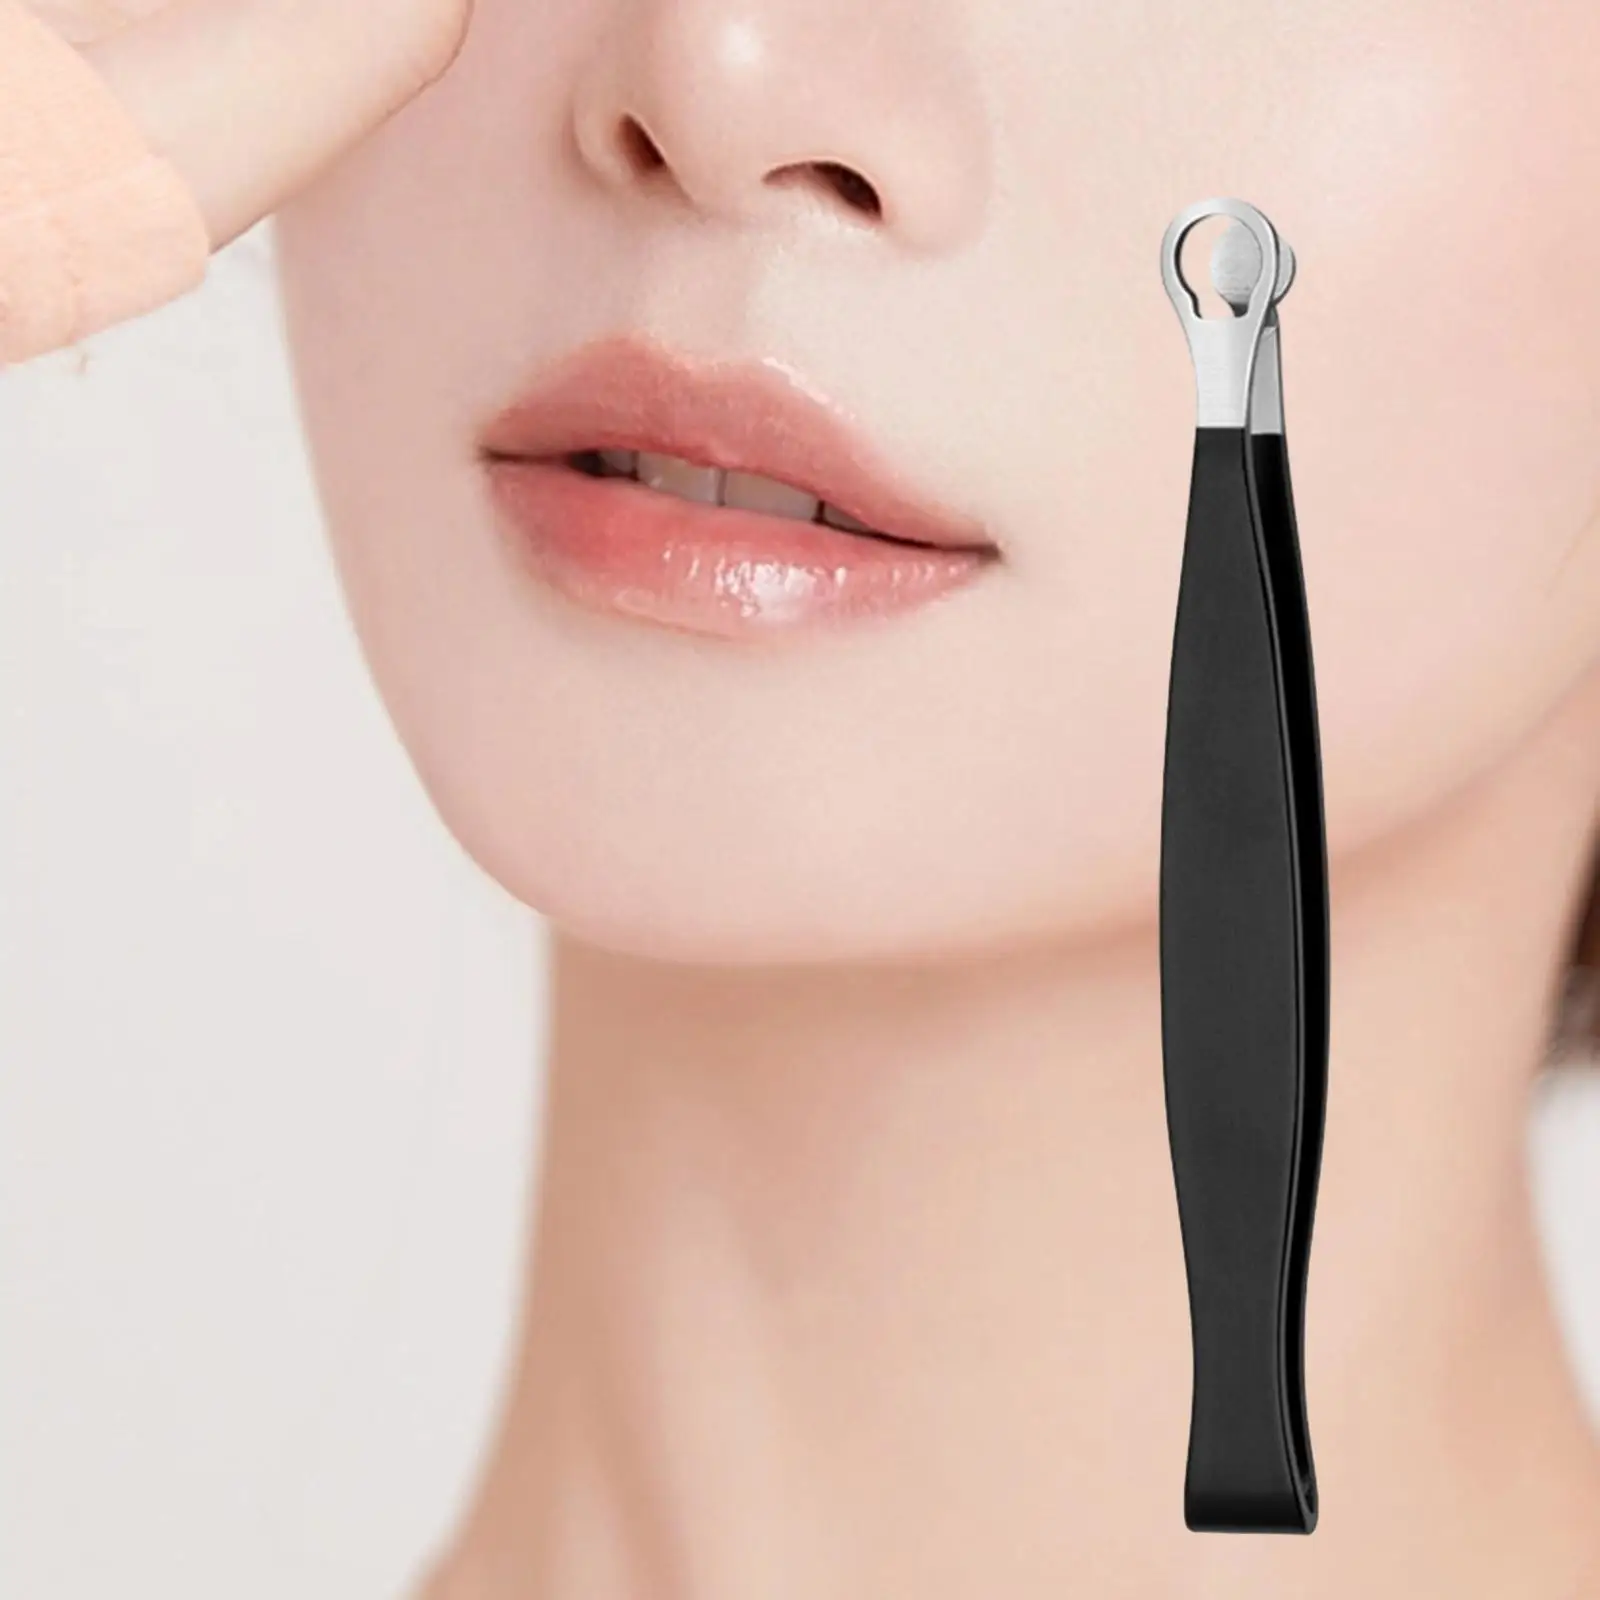 Stainless Steel Round Tip Tweezer for Trimming and Grooming, Universal Nose Hair Trimming Tweezers